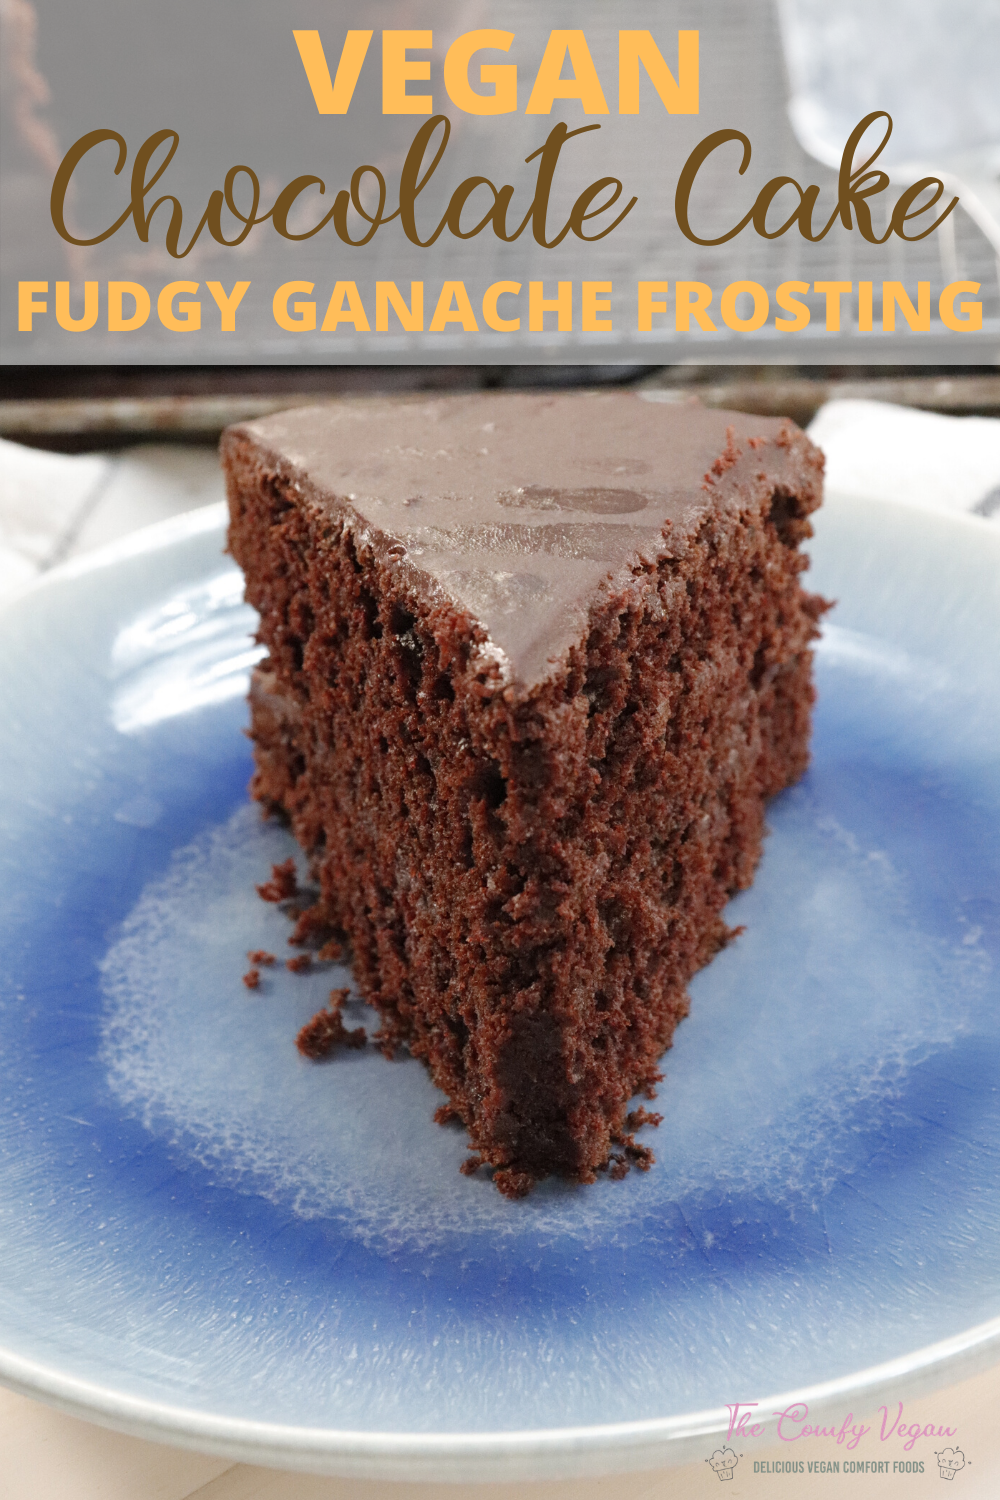 Don't miss out on this vegan chocolate cake recipe! It's a great way to incorporate sweets in your life without breaking your vegan lifestyle.